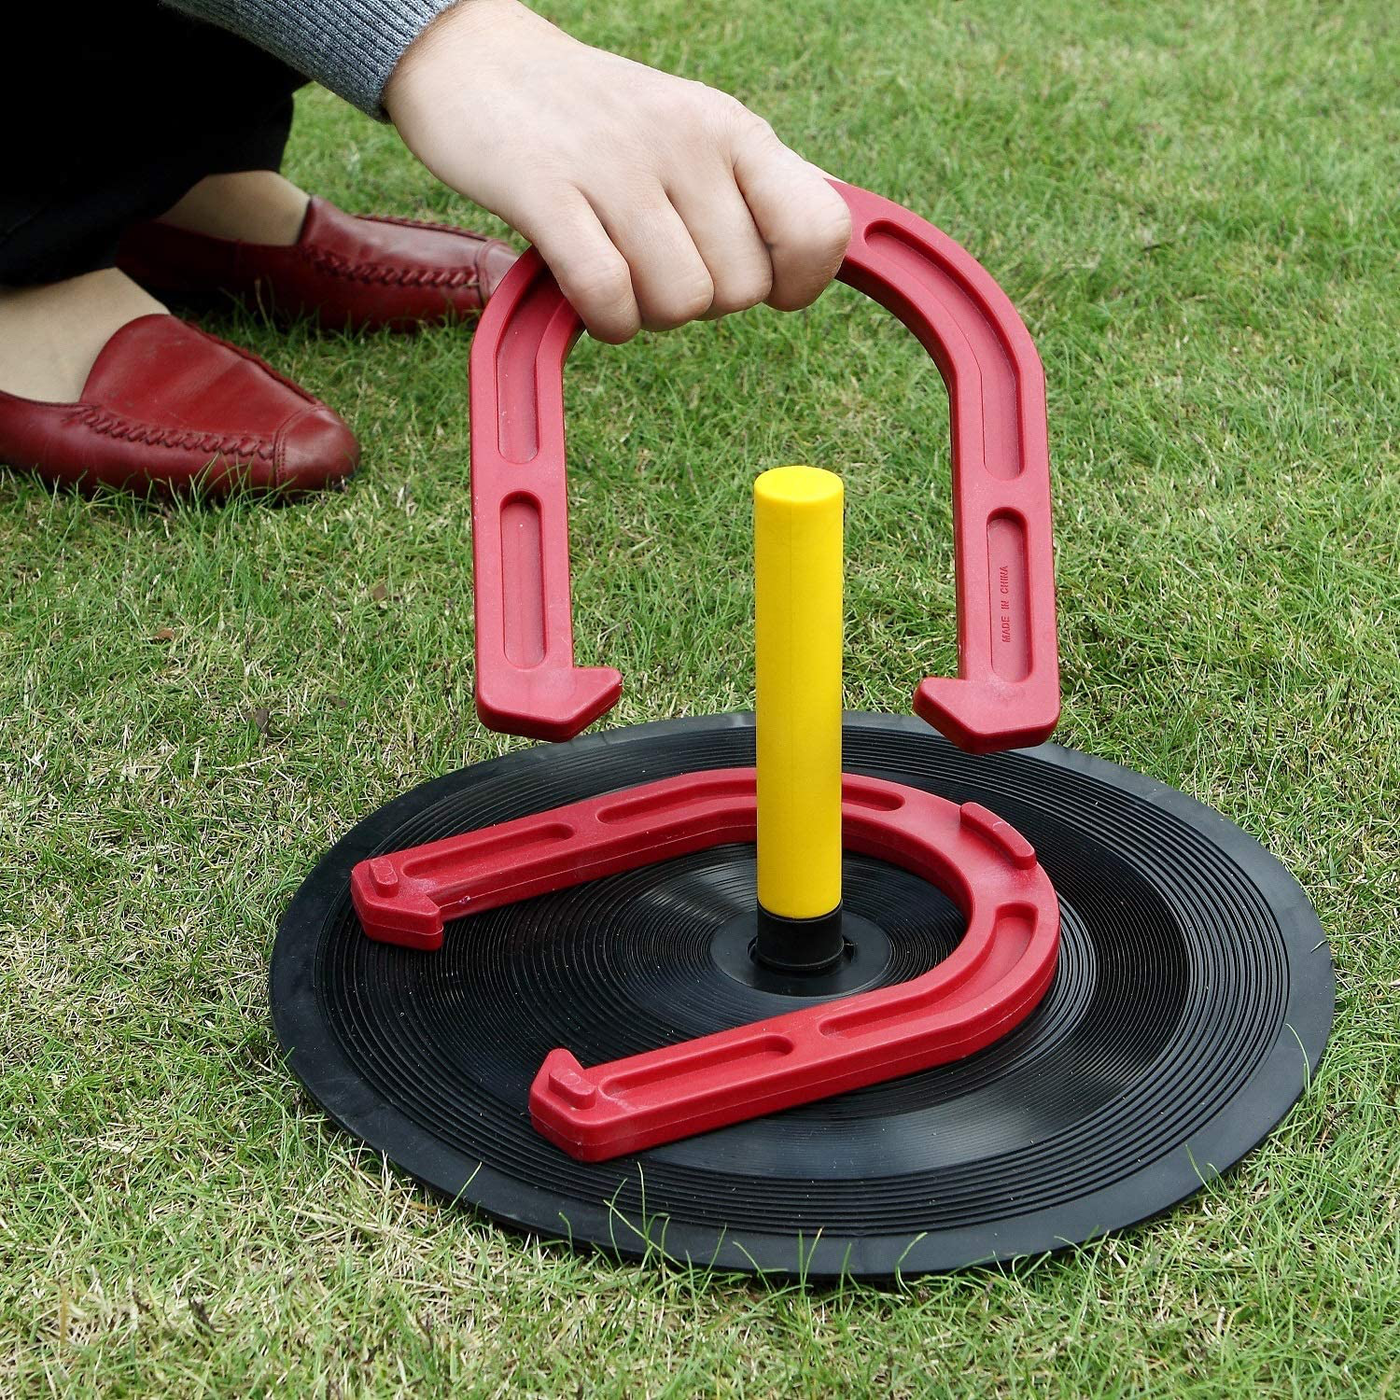 Win SPORTS Outdoor Indoor Rubber Horseshoes Set Includes 4 Horseshoes,2 Pegs,2 Rubber Mats,2 Red Plastic dowels,Beach Games Perfect for Tailgating,Camping,Backyard,Fun for Kids Adults